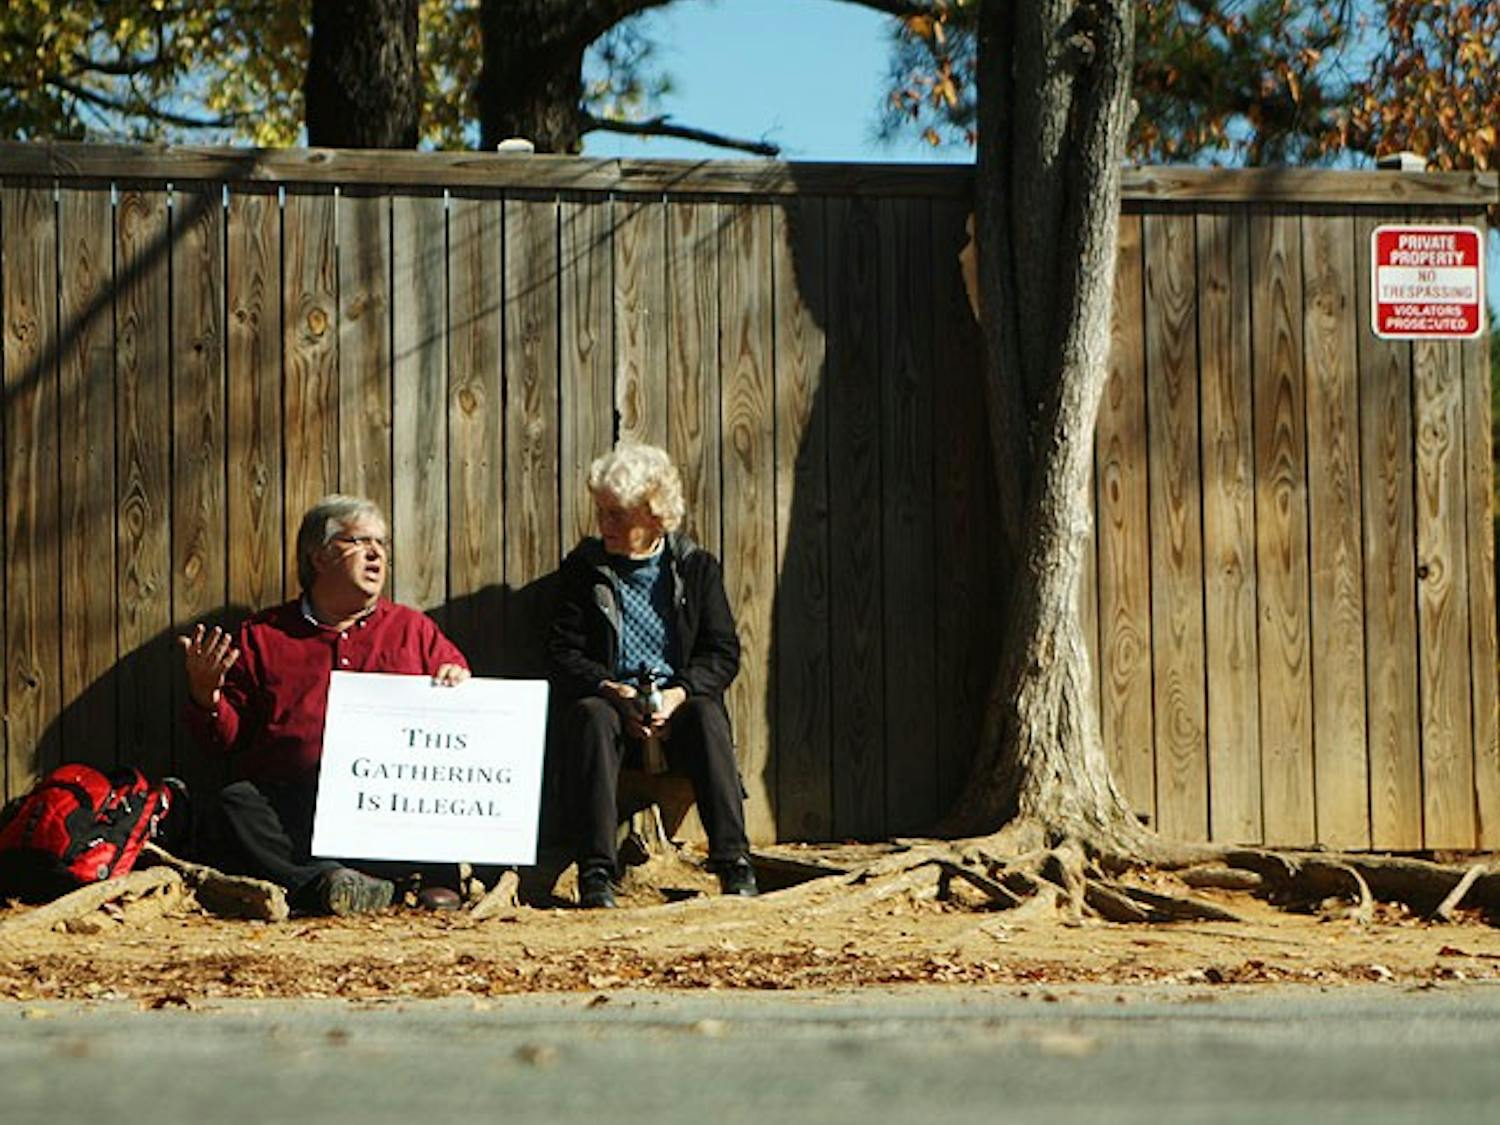 Stephen Dear and Maria Darlington have lunch on the corner of Jones Ferry and Davie Roads in Carrboro in protest of the anti-lingering ordinance.  Stephen has spent his lunch break during the week on this corner since the last week in October and is joined by friends and supporters daily.  